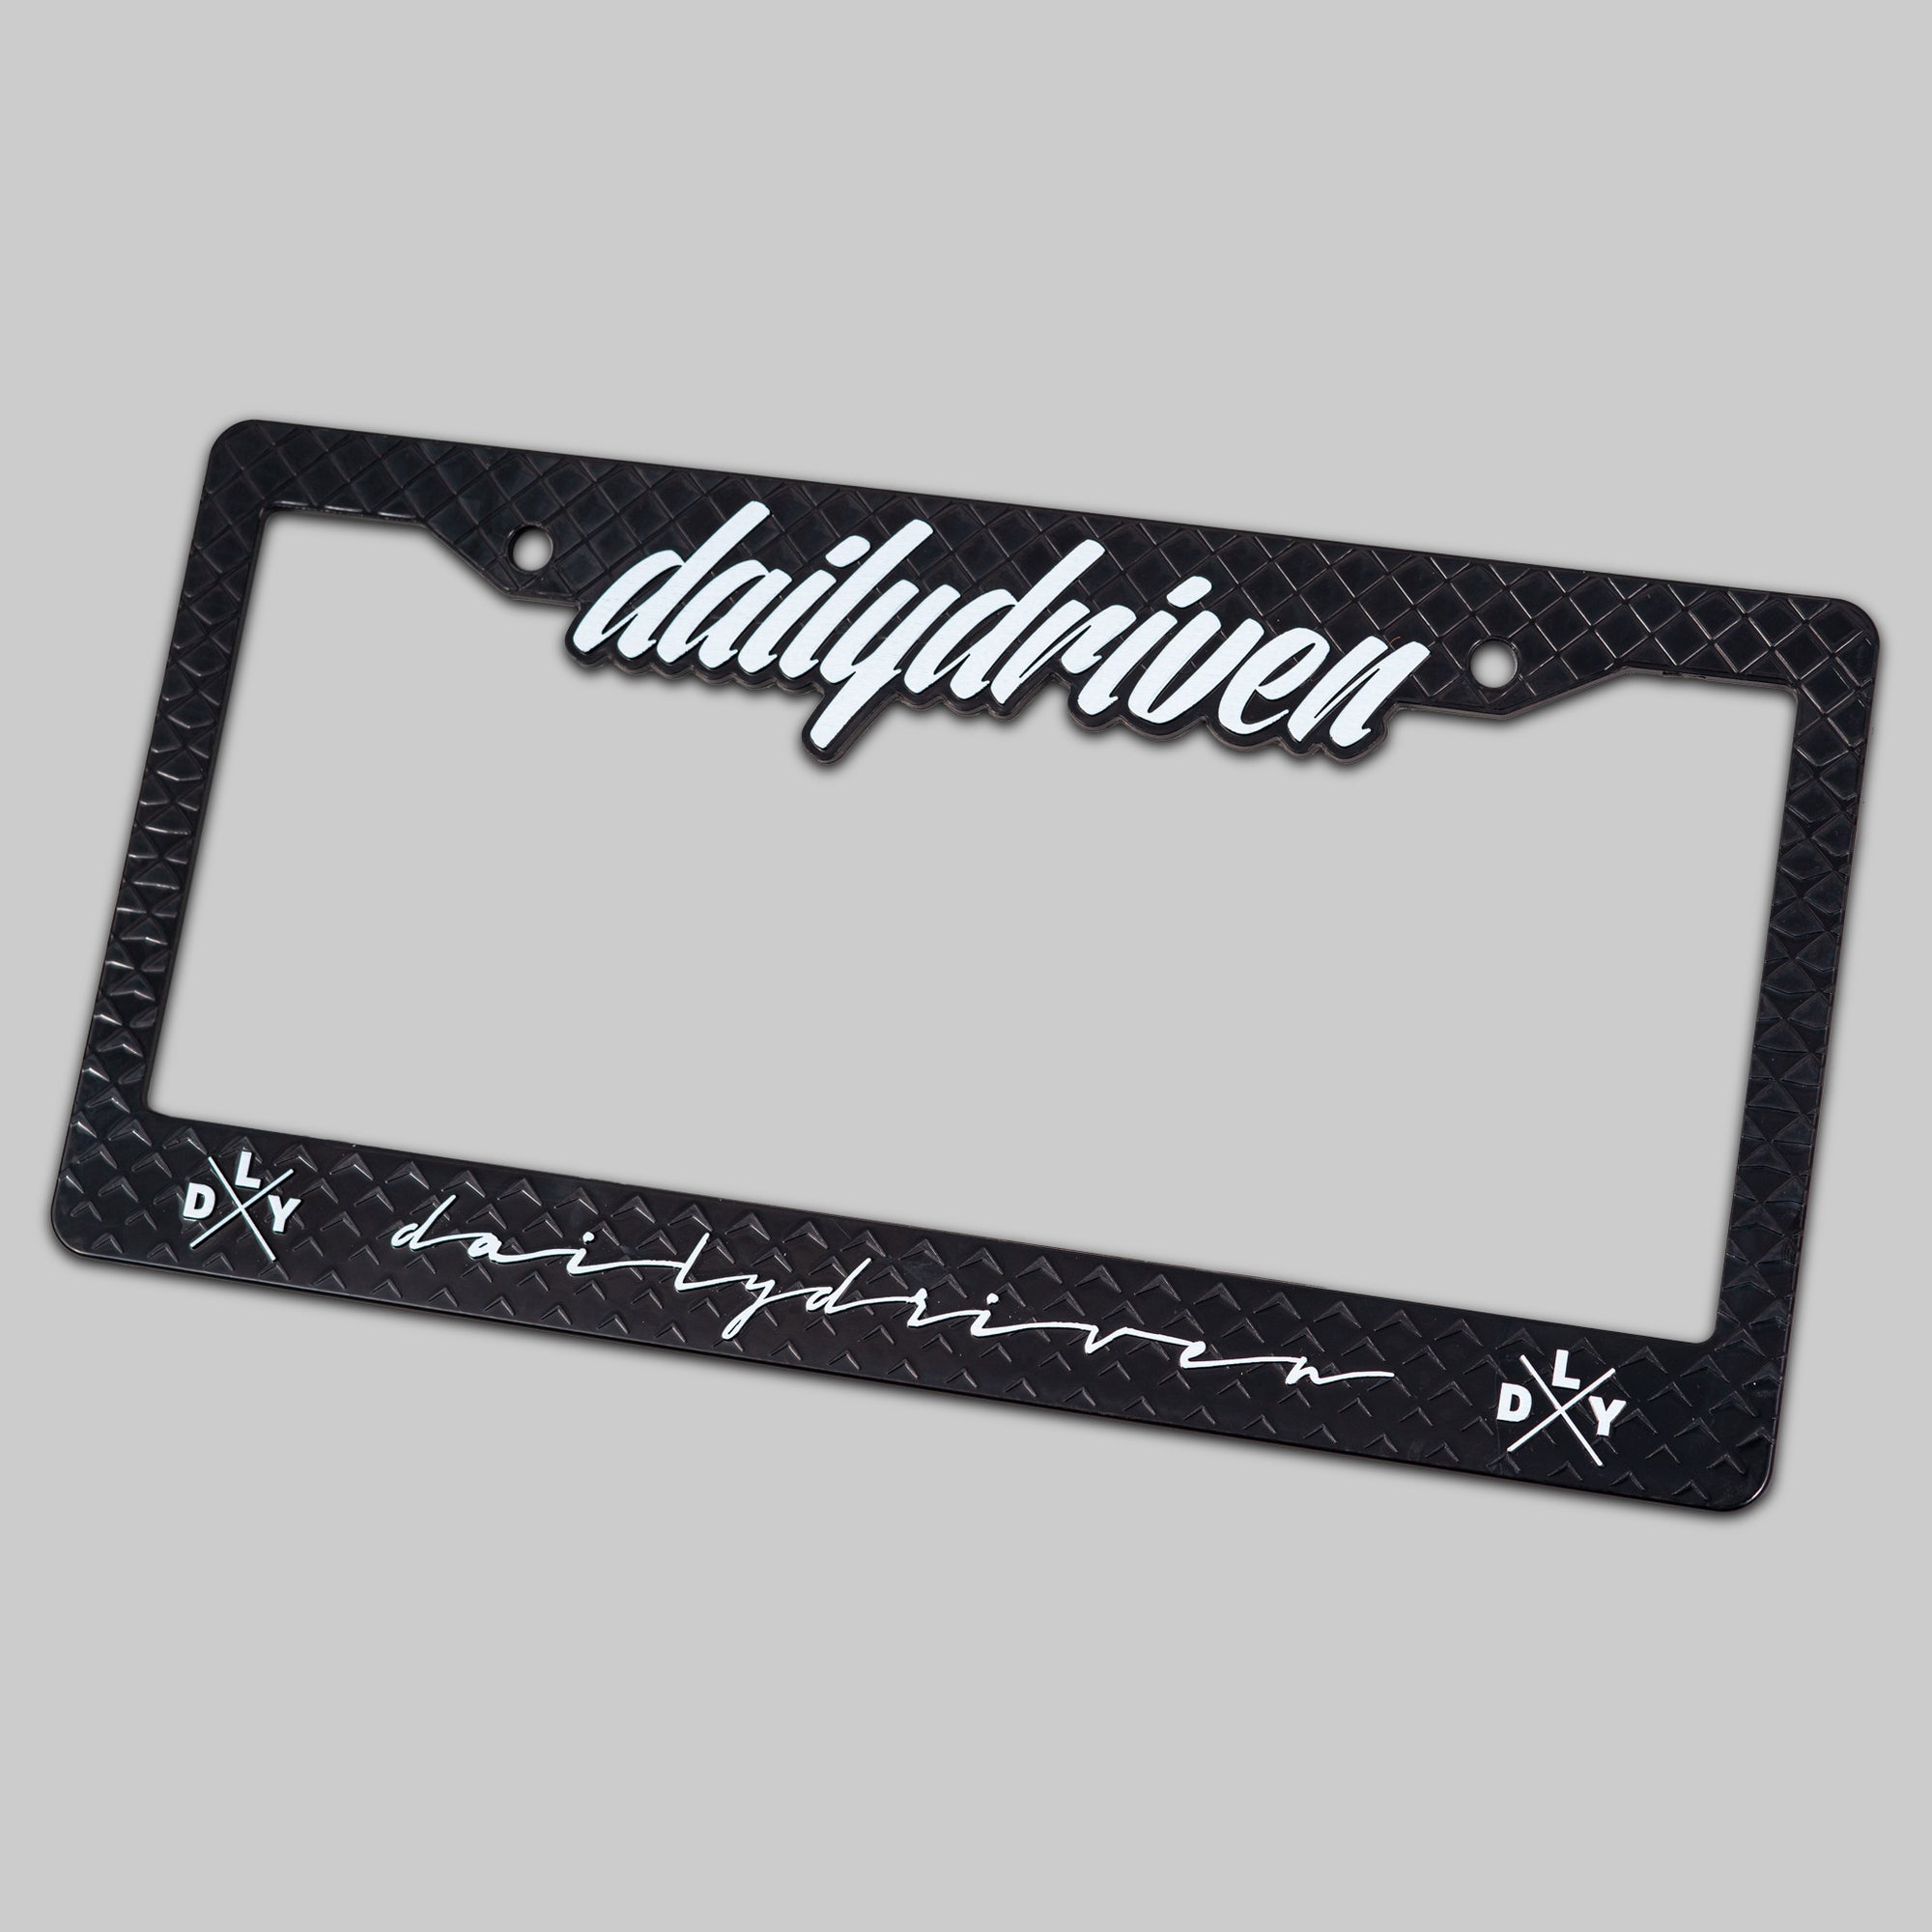 DailyDriven Relaunch License Plate Frame